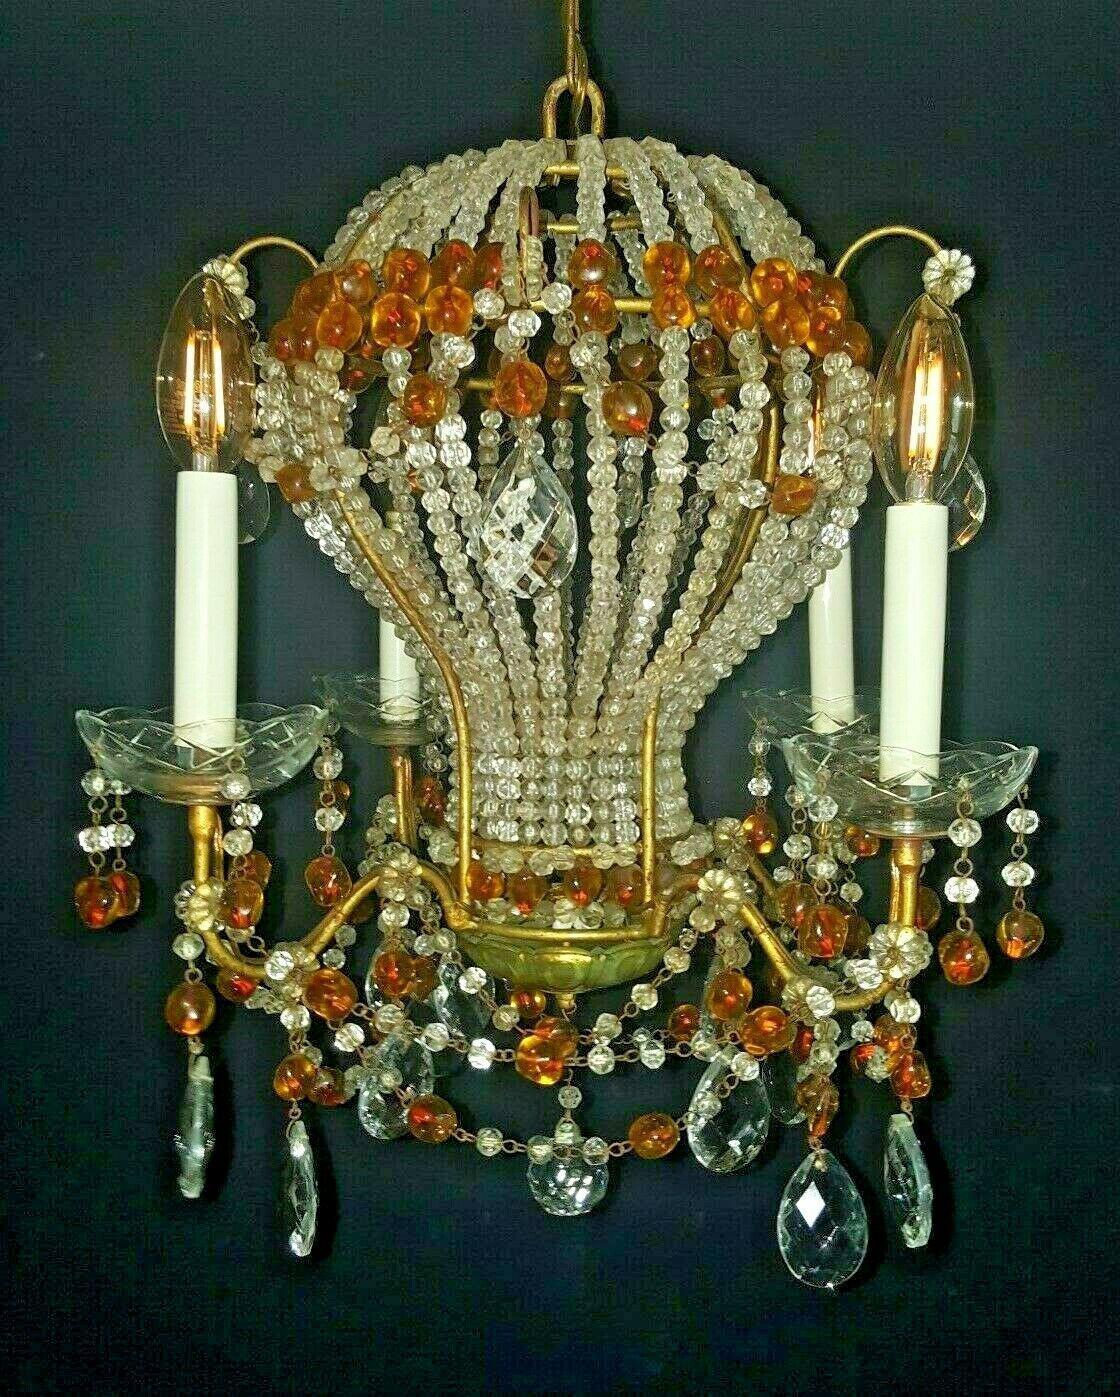 Lovely 1940's Hollywood Regency Cut and Beaded Crystal Hot Air Balloon. Wouldn't this be nice in the babies room?? 4 lights and a spectacular piece!